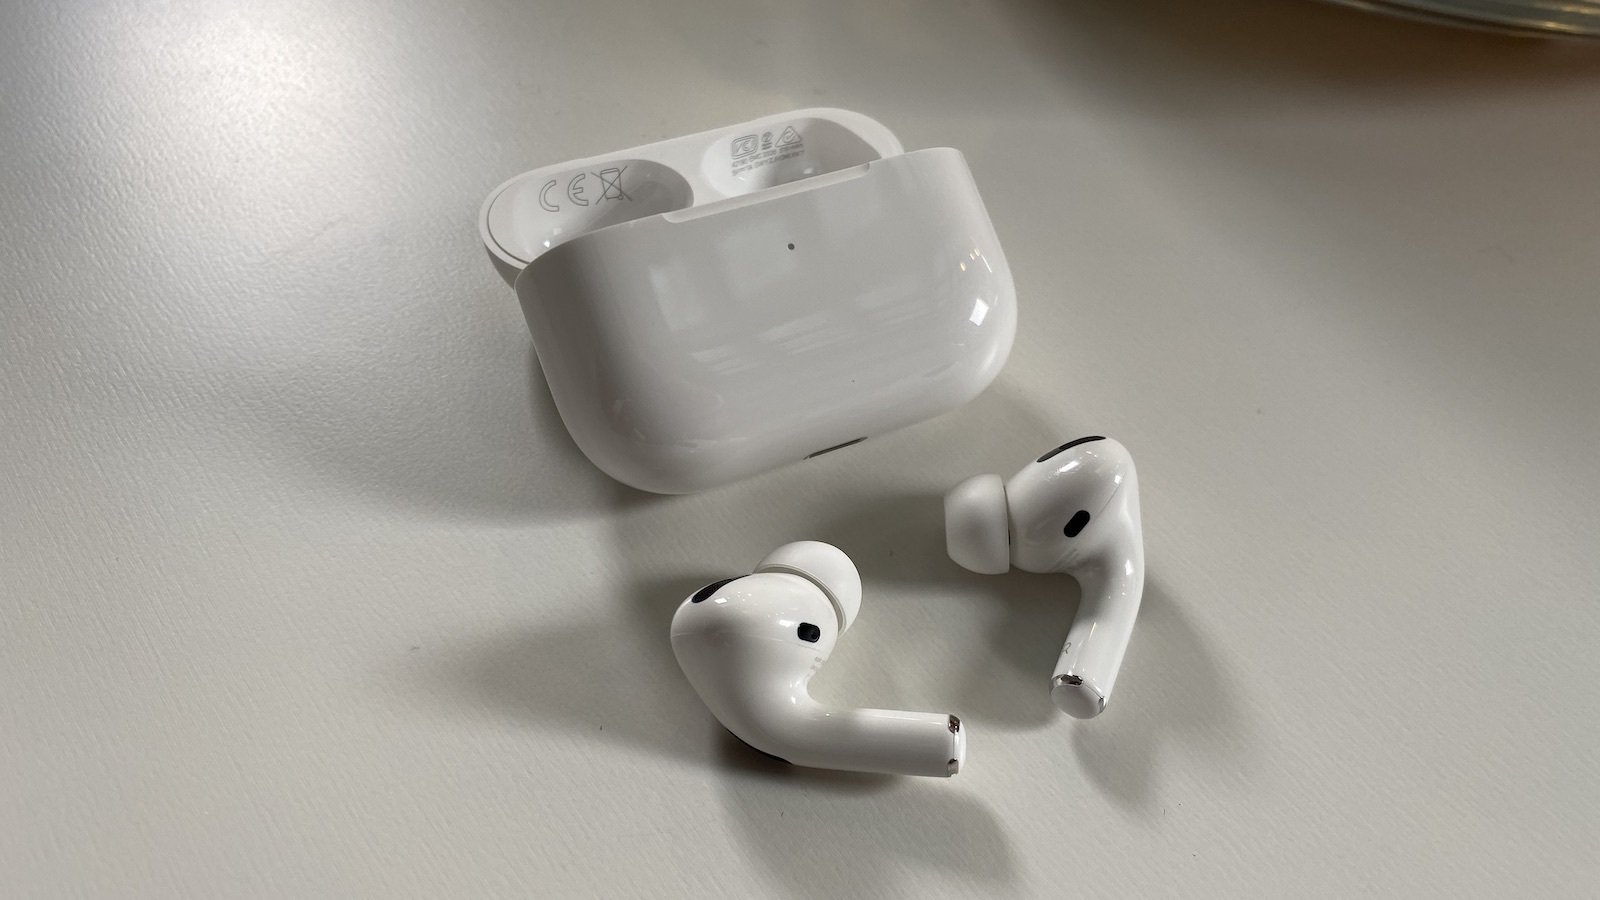  ,  Apple    AirPods Pro 2   